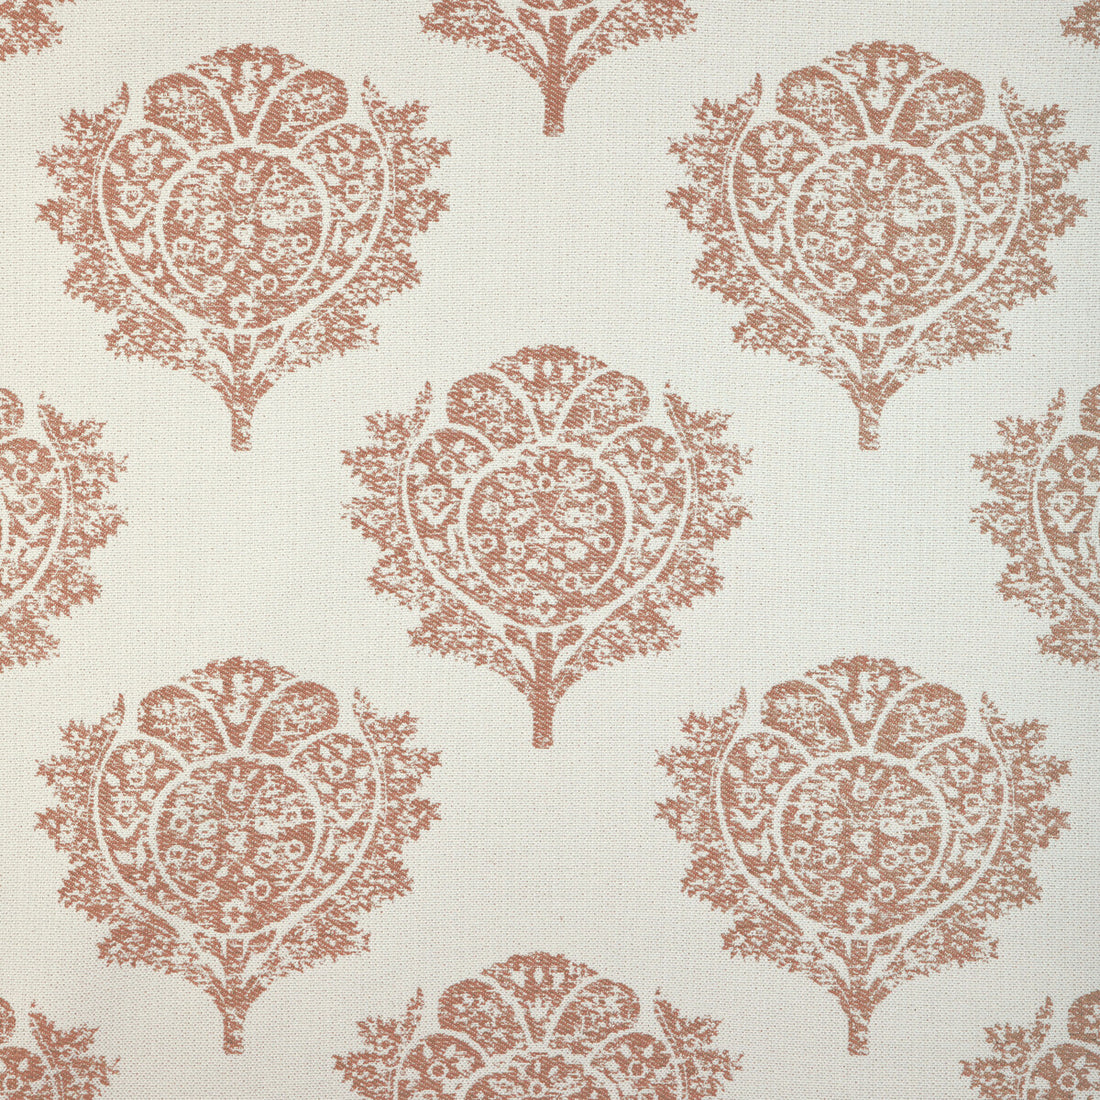 Heirlooms fabric in clay color - pattern 36864.24.0 - by Kravet Couture in the Atelier Weaves collection